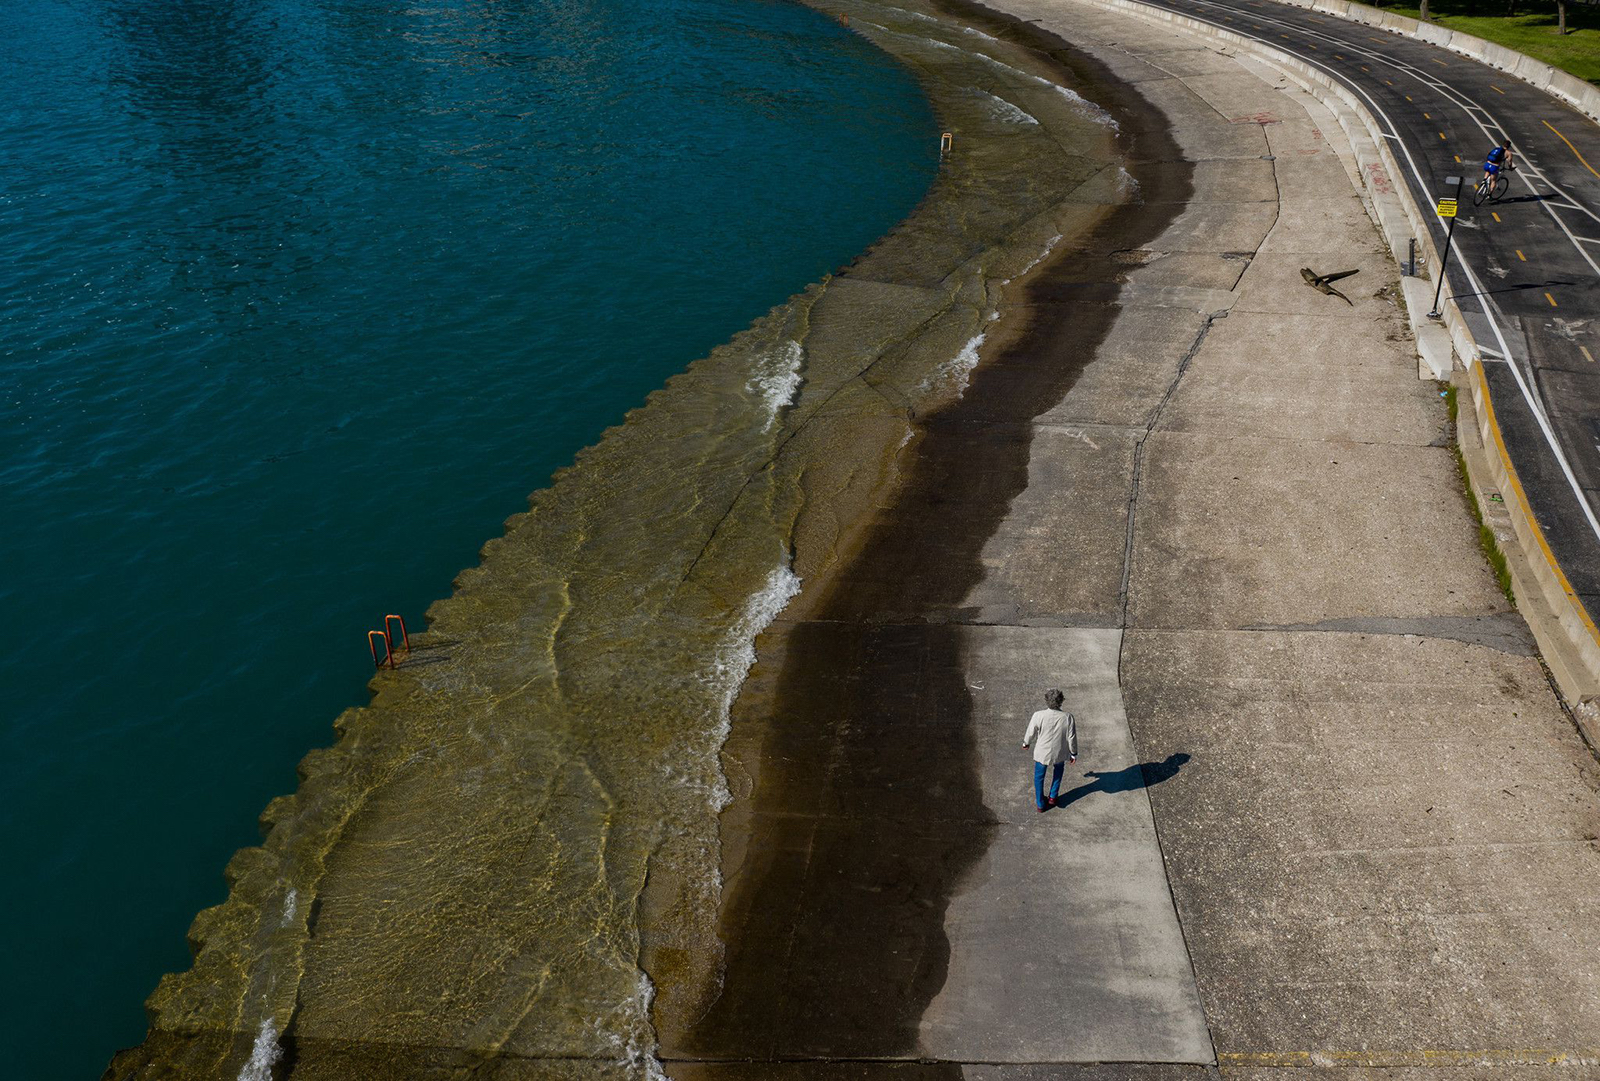 a person walks along the edge of a blue-green body of water on a road which is partially covered with water overflow